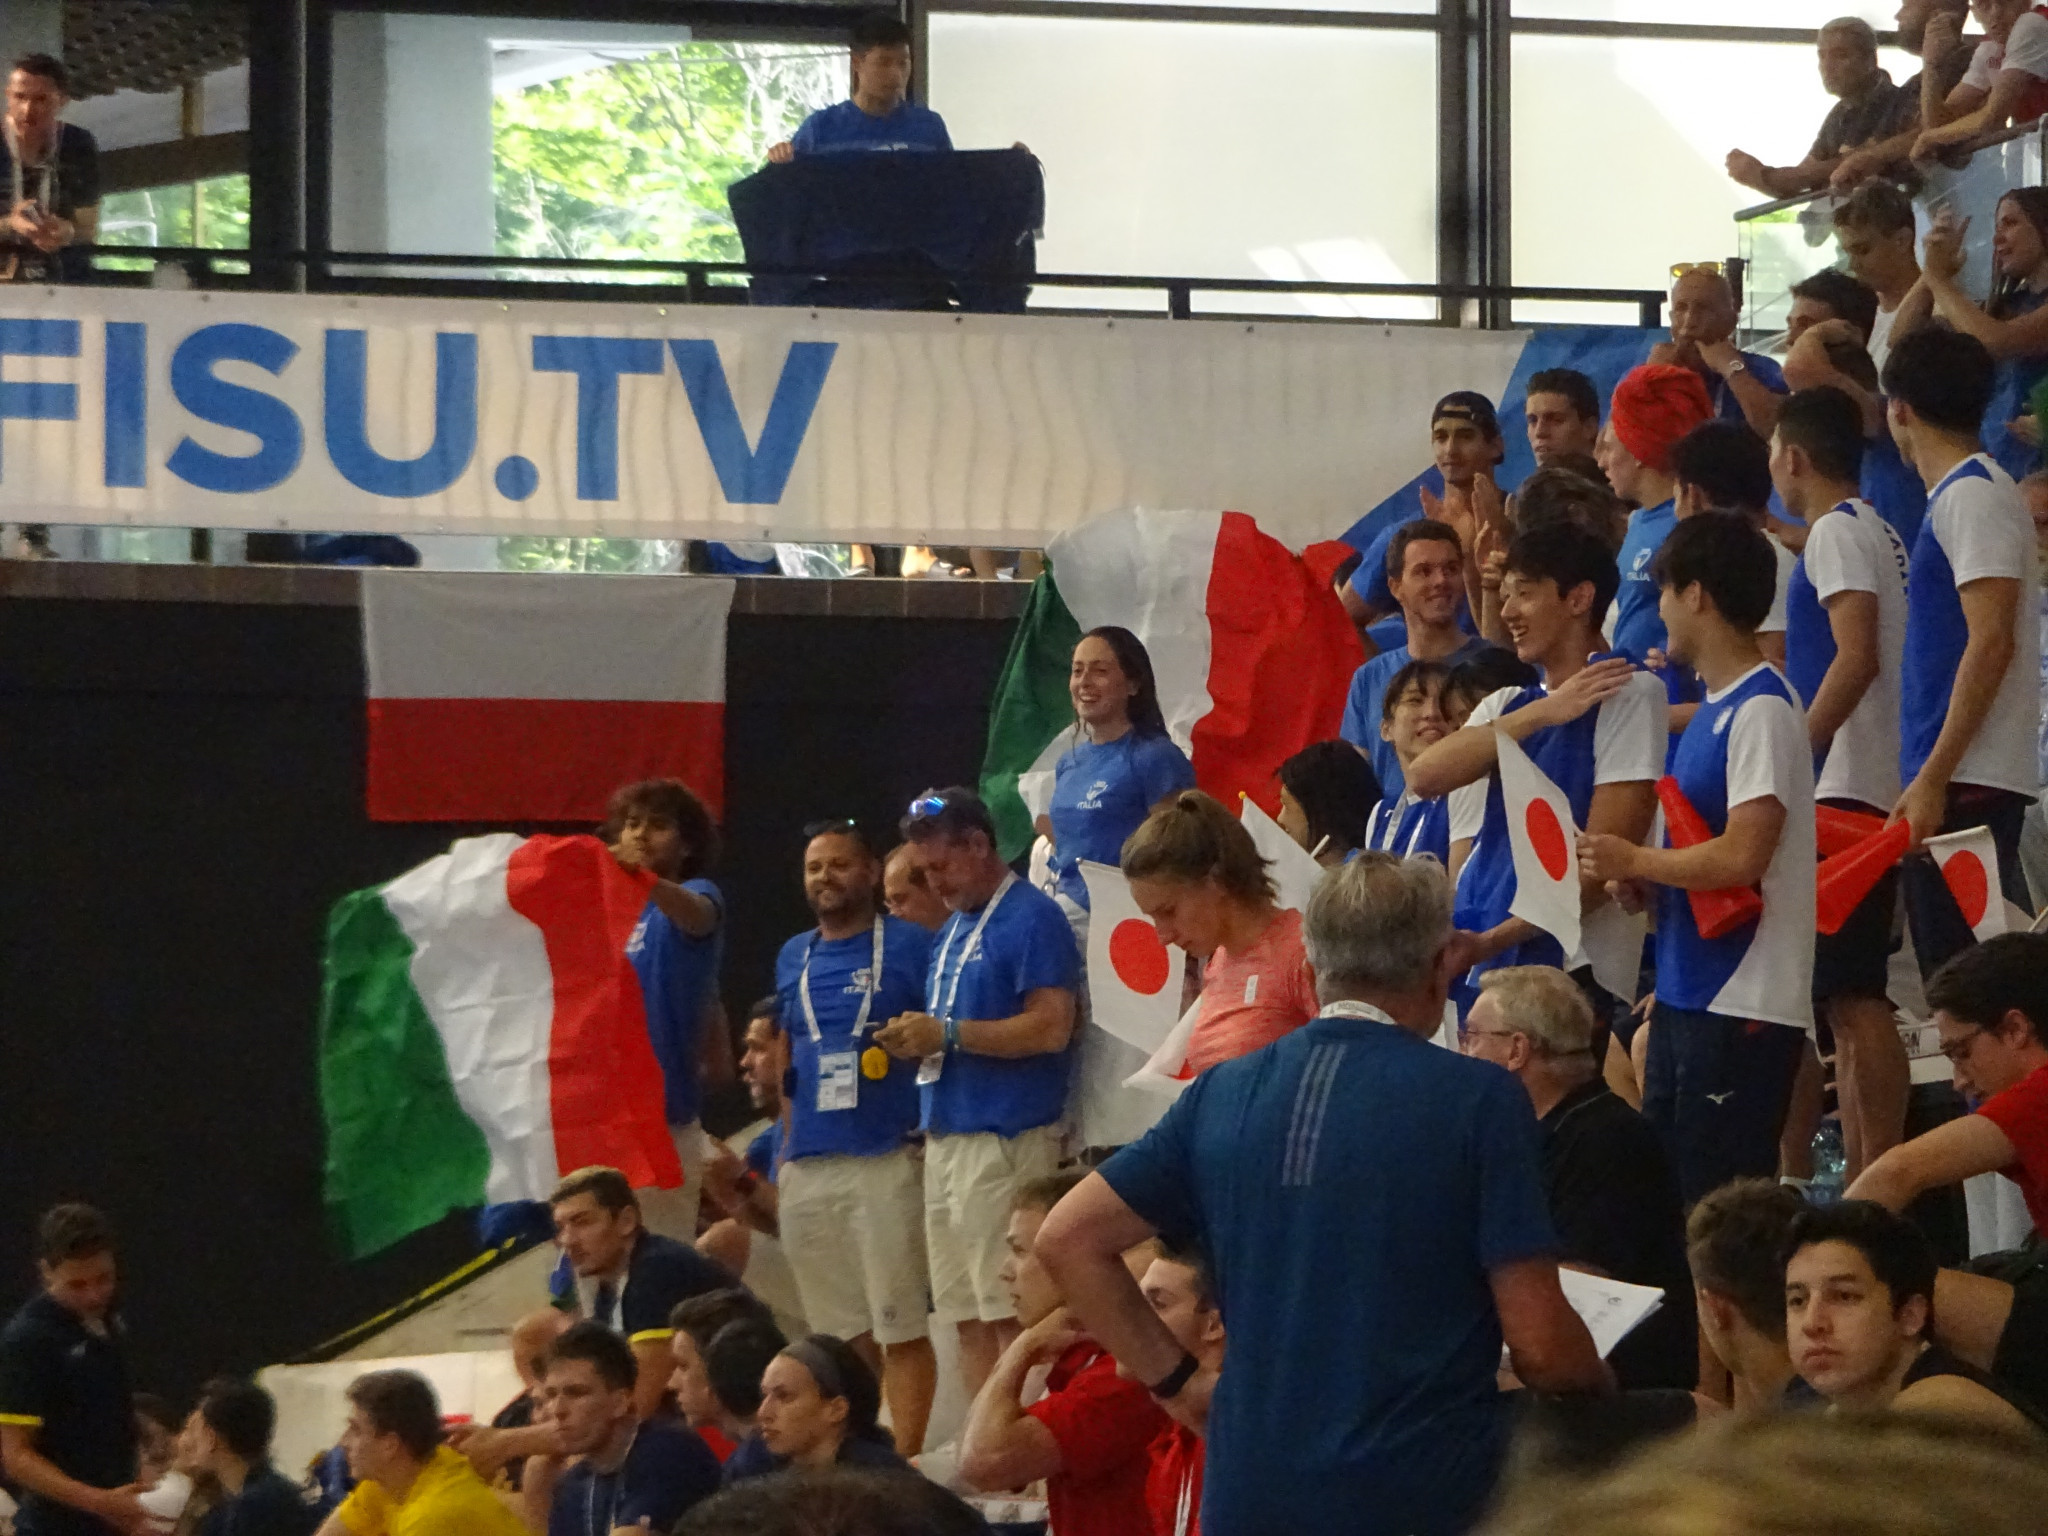 Italian fans made plenty of noise as the swimming finals continued at Piscina Scandone ©Philip Barker